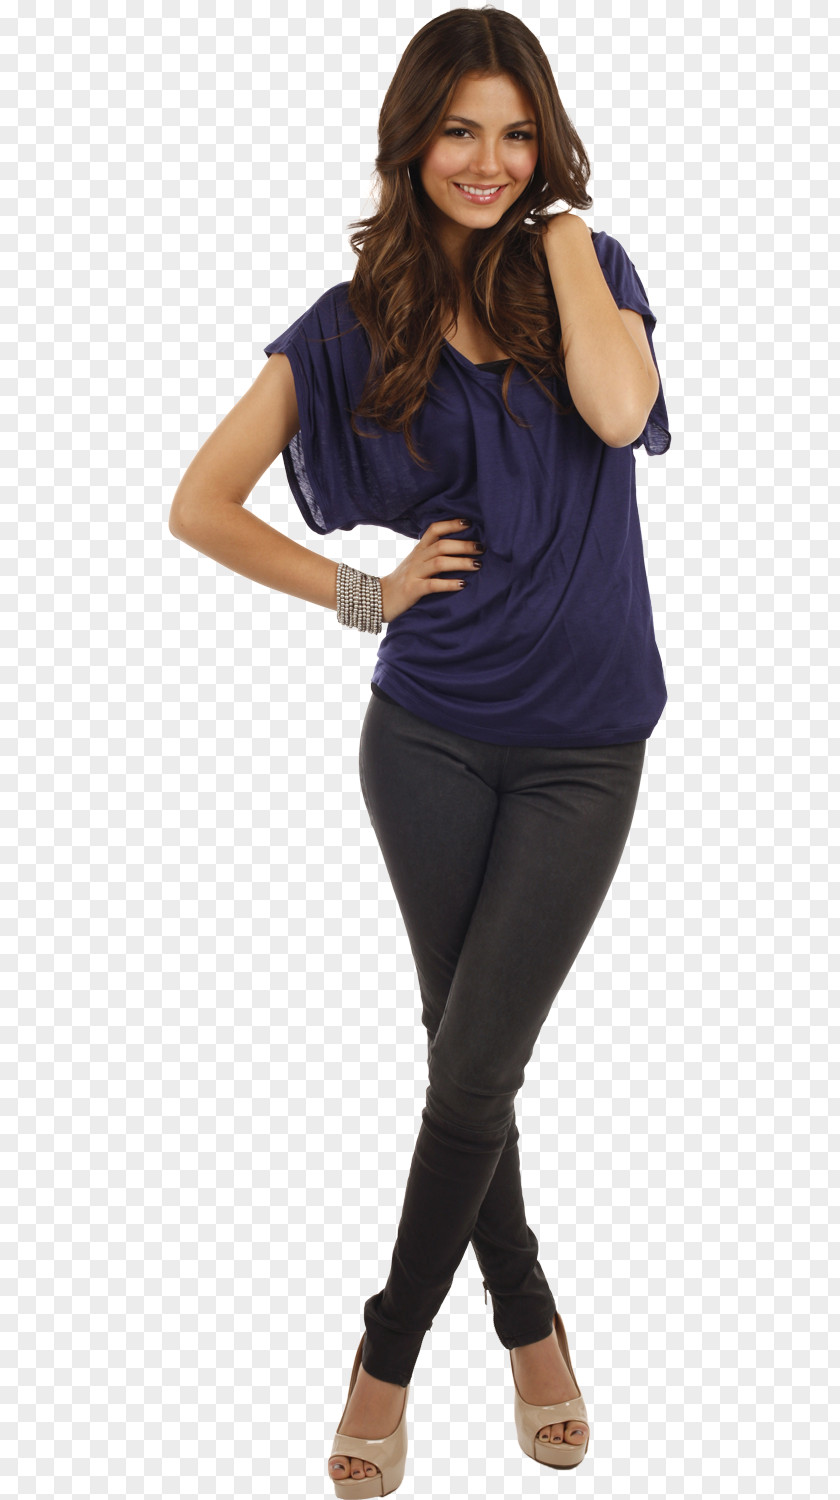 Actor Victoria Justice Zoey 101 Female Nickelodeon PNG